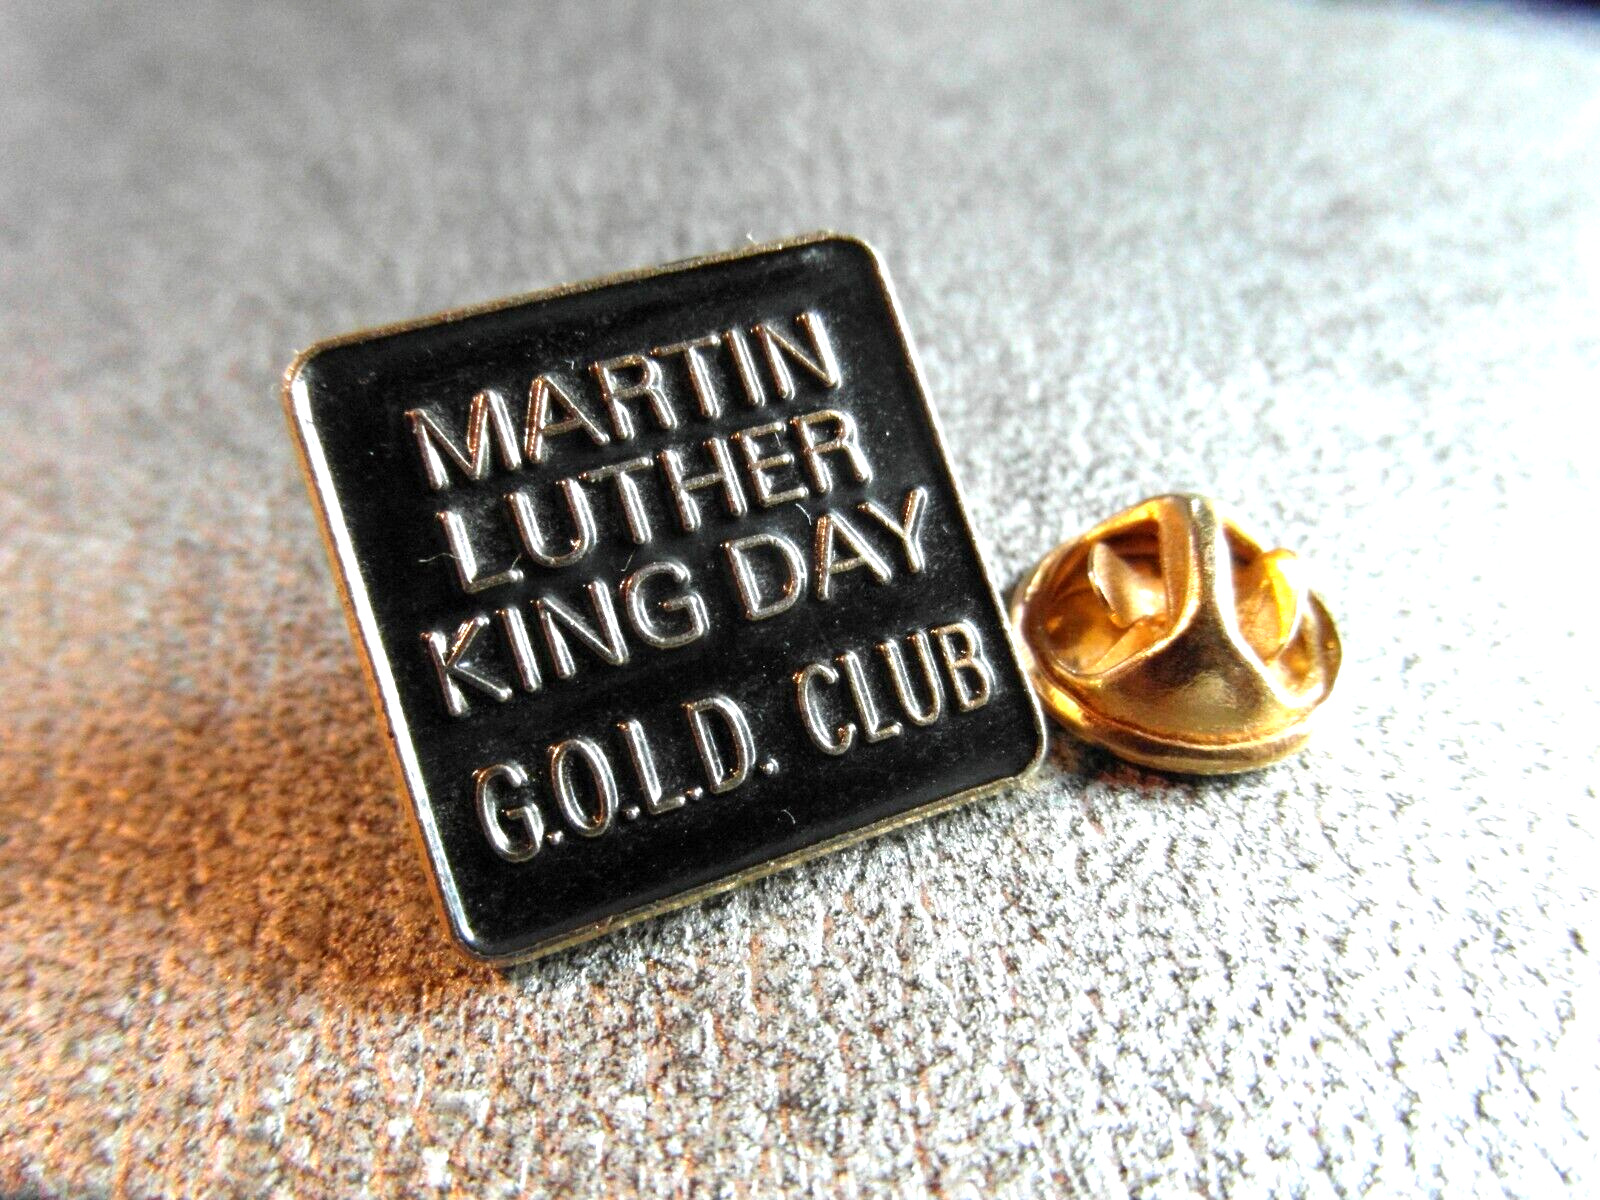 RARE PIN'S PINS - MARTIN LUTHER KING DAY GOLD CLUB - I HAVE A DREAM - VINTAGE